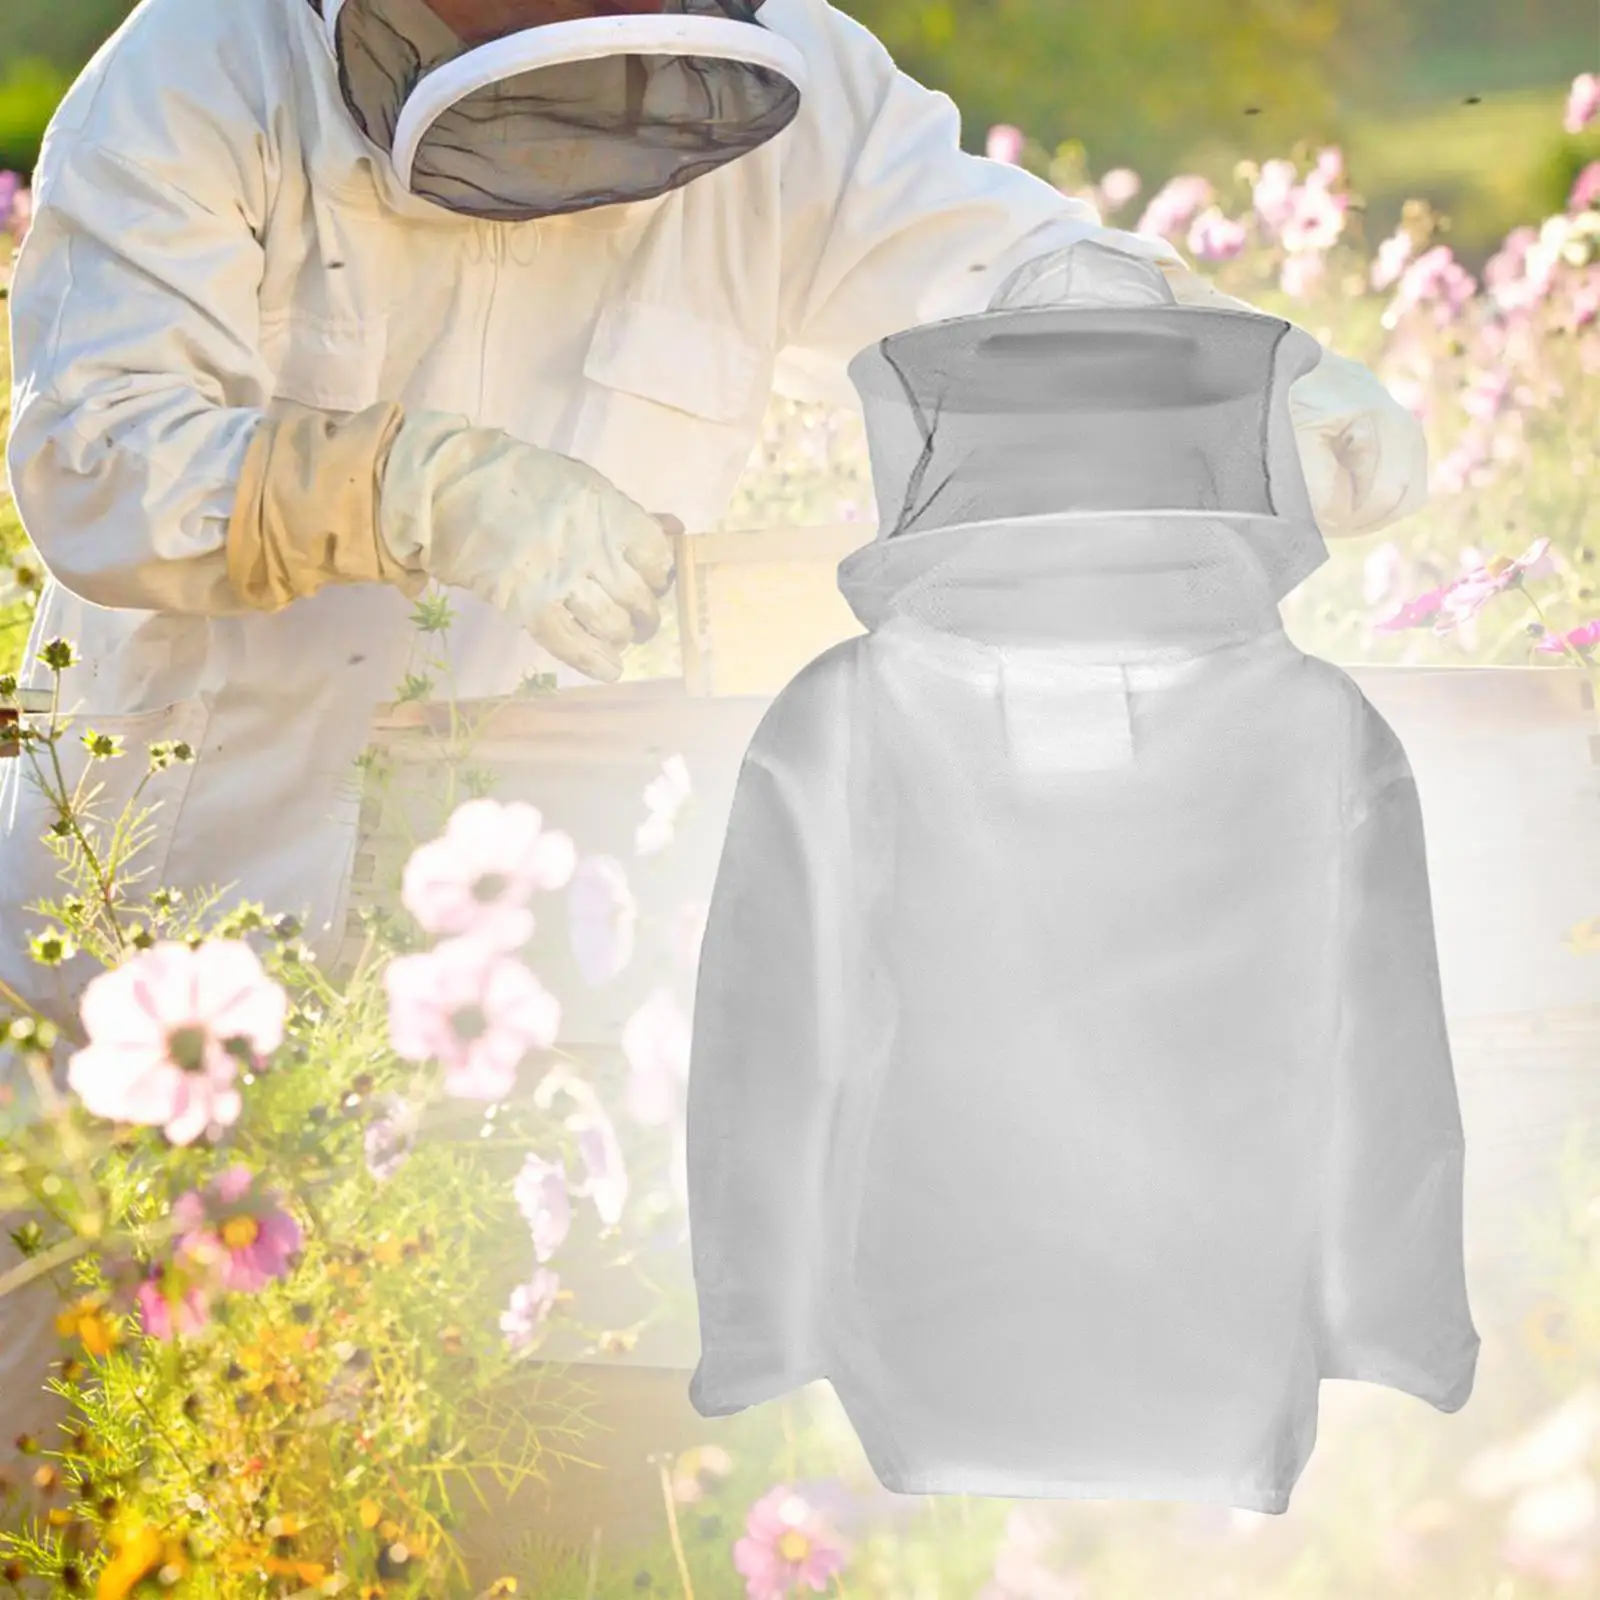 Bee Outfit Comfortable Fencing Veil Hood Beekeeping Protective Suit for Professional Beekeepers Commercial Beekeepers Protection